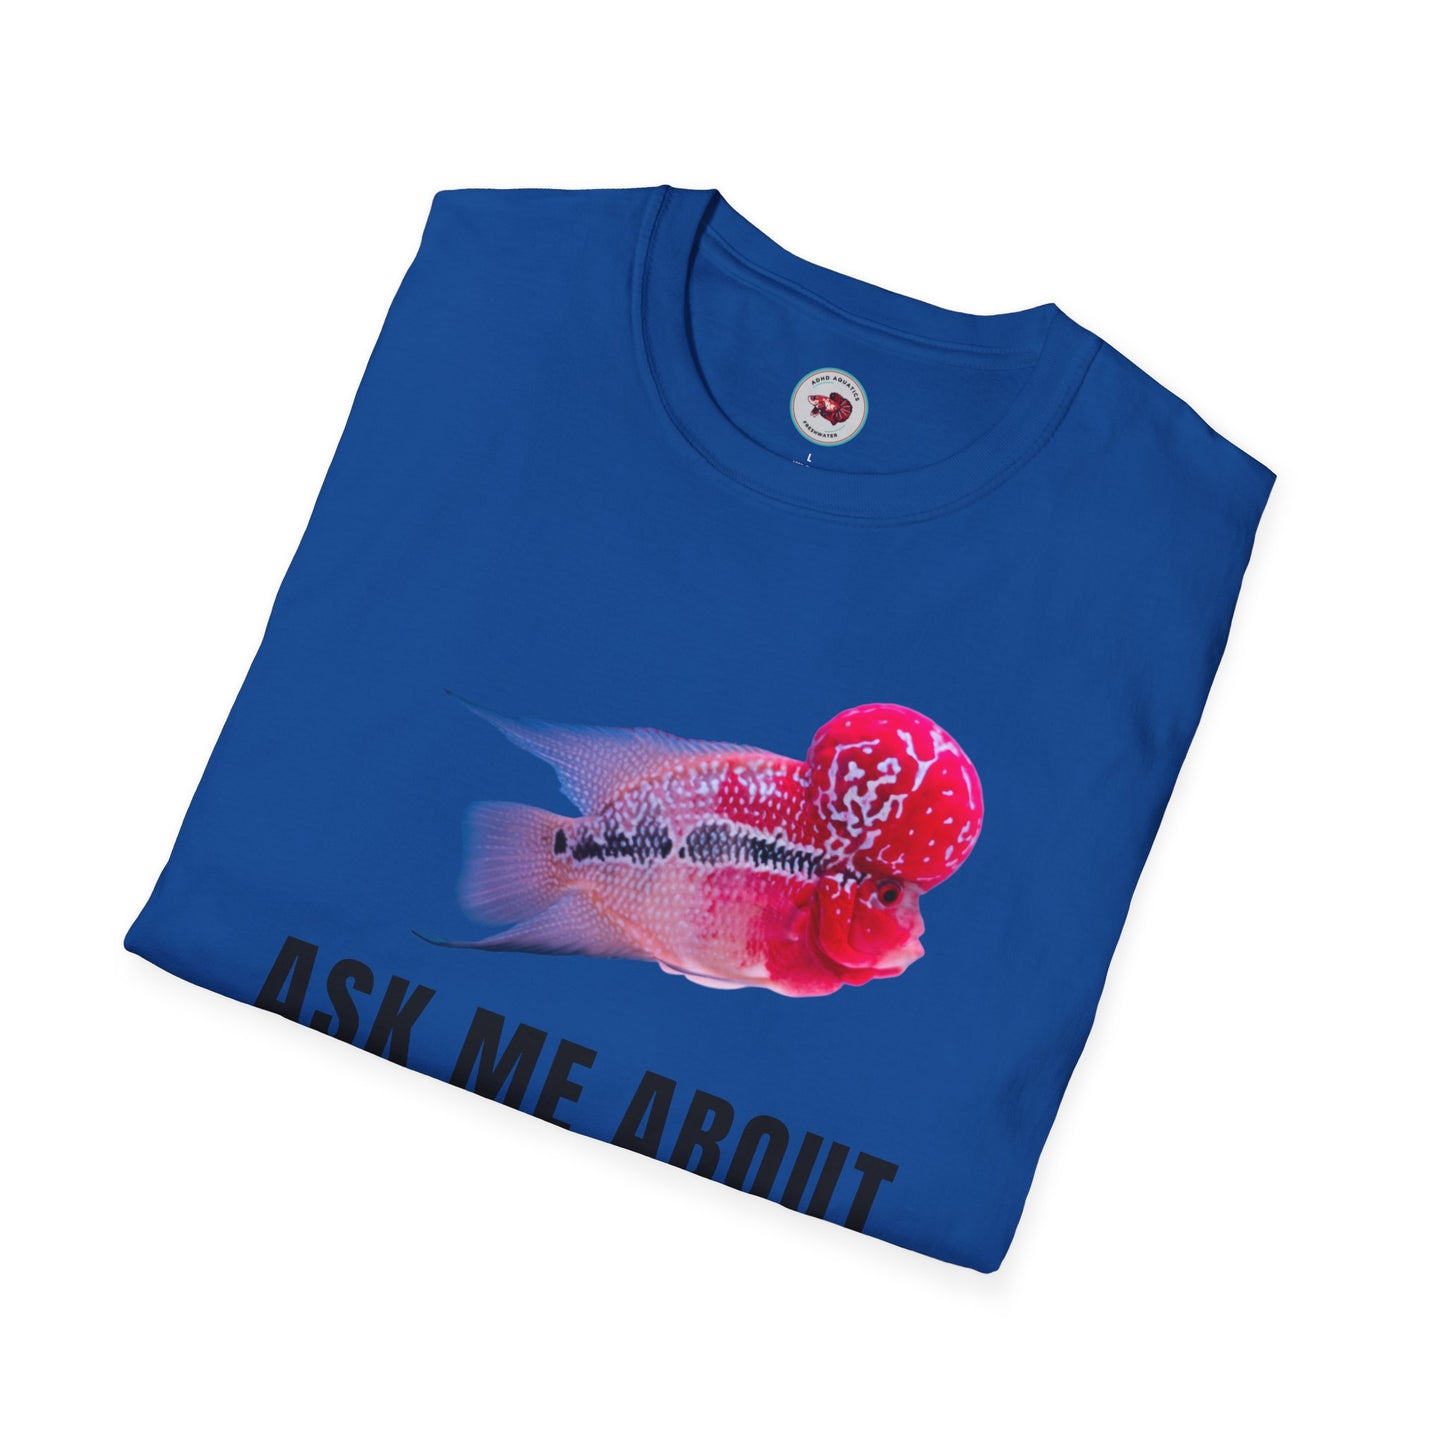 Flowerhorn Ask Me About My KOK Unisex Softstyle T-Shirt by ADHD Aquatics